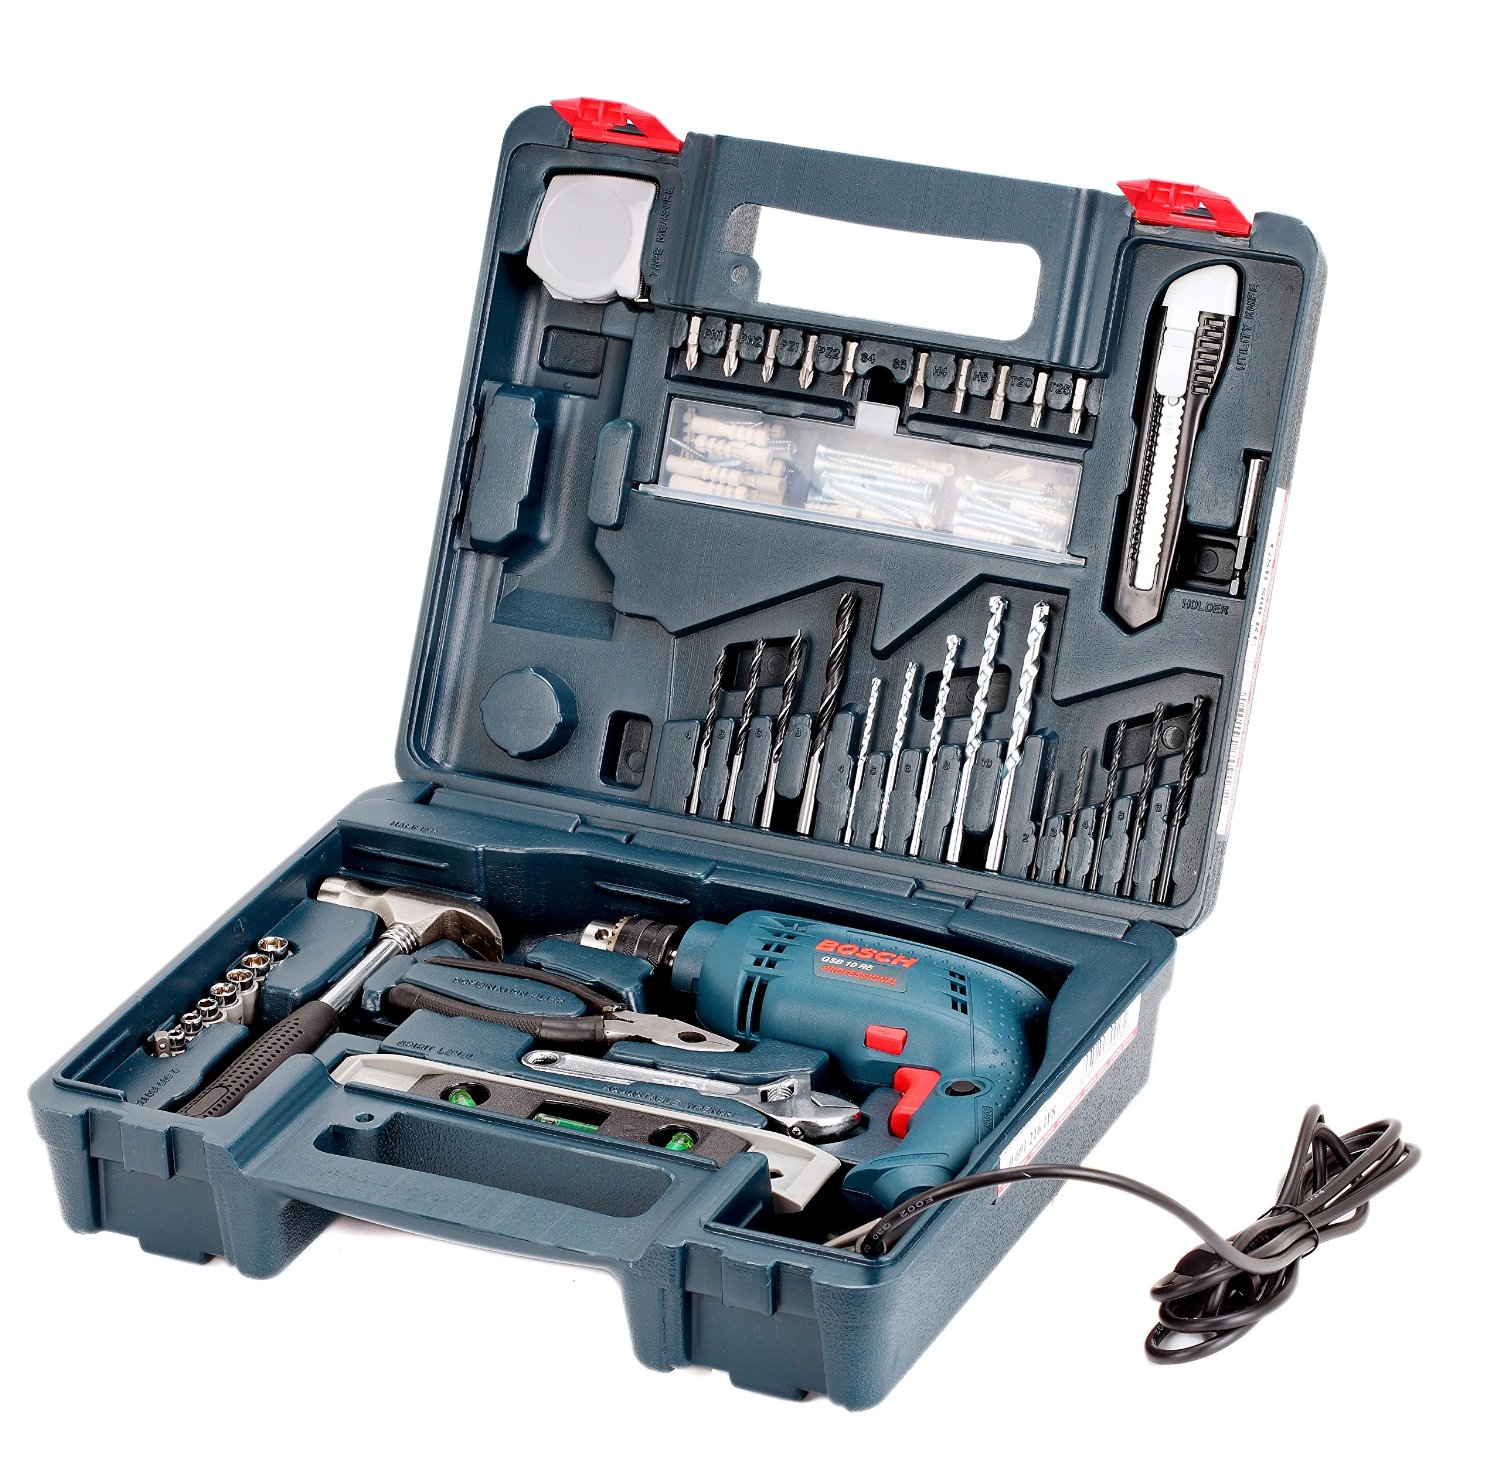 Buy Bosch 10mm 500w Impact Drill Smart Kit Gsb 10 Re Online At